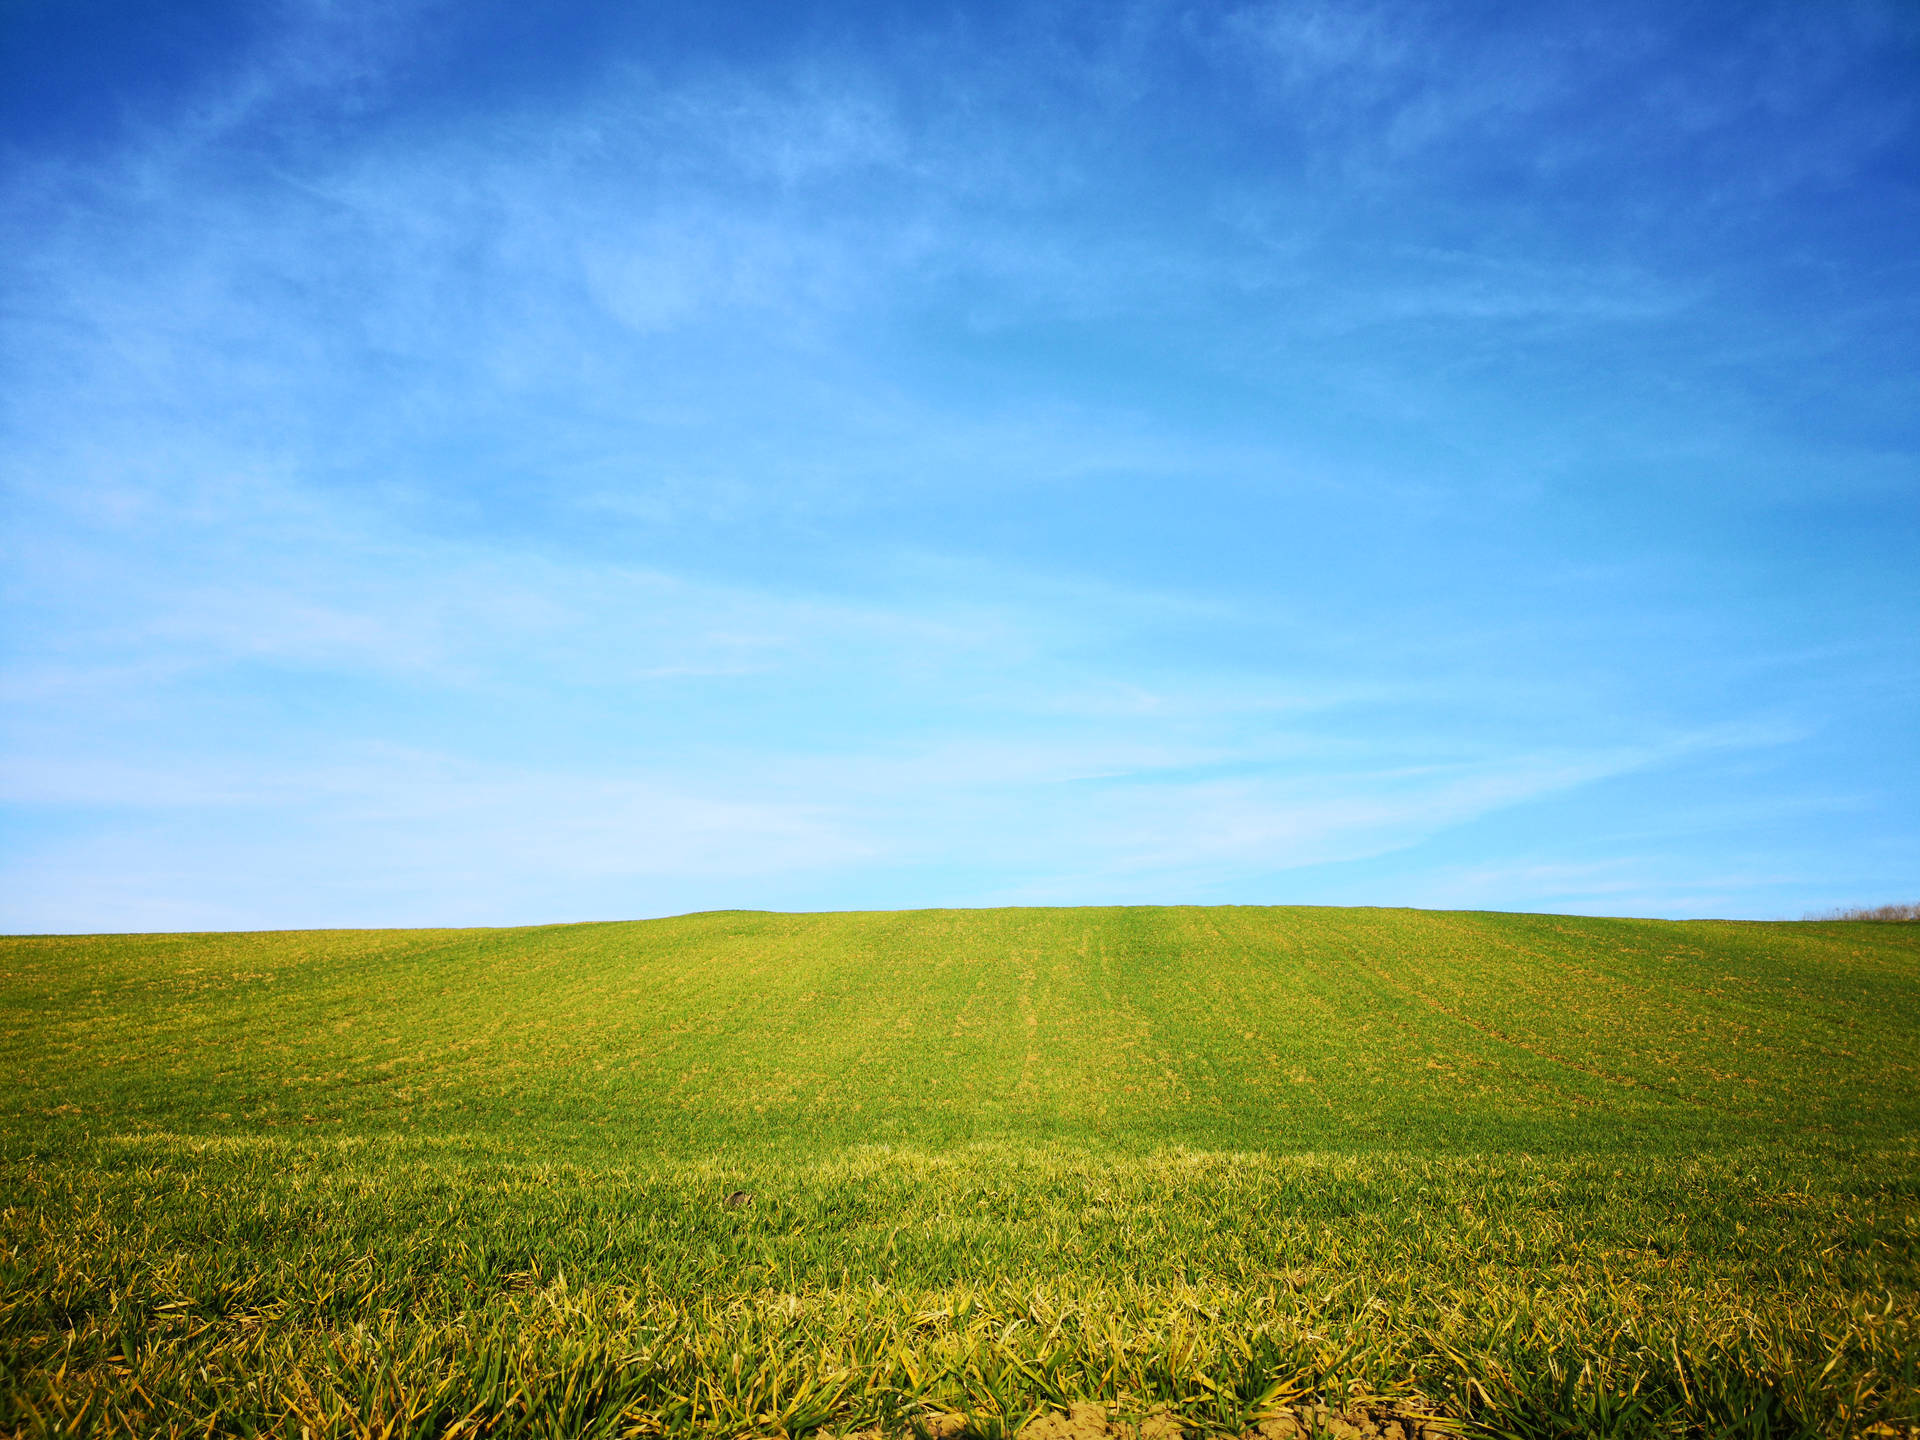 Windows Xp 7296X5472 Wallpaper and Background Image